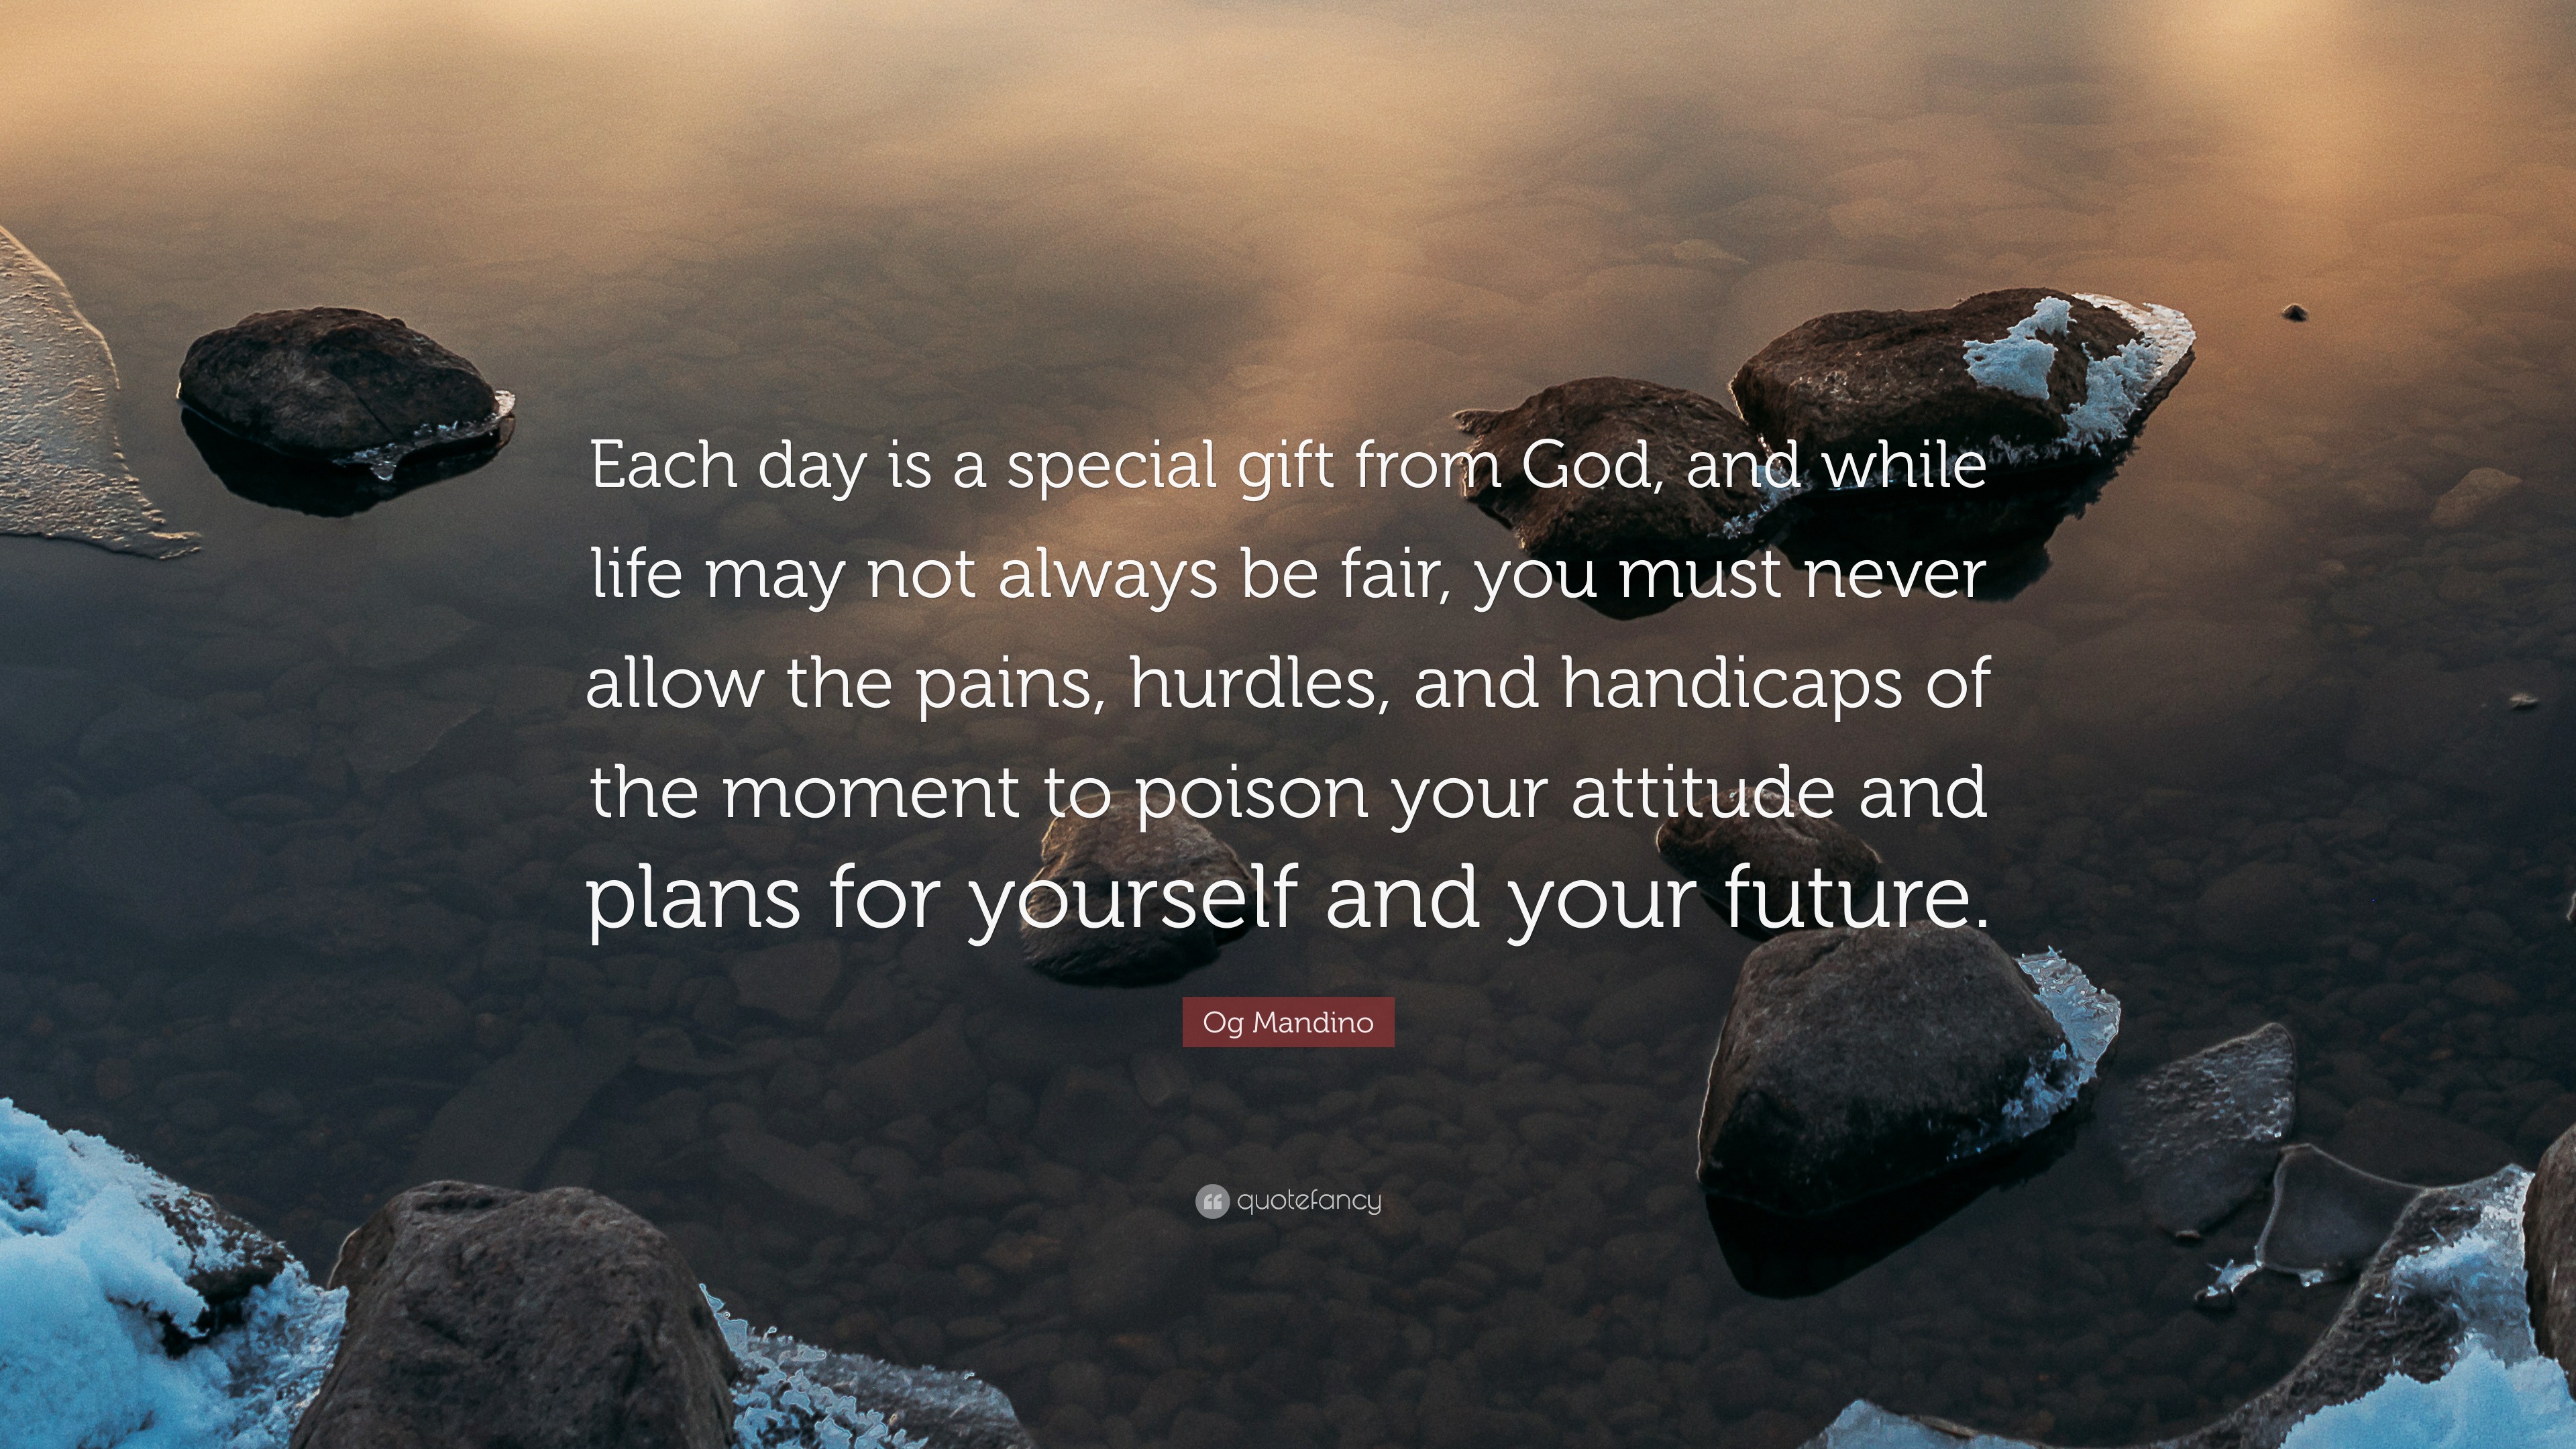 Og Mandino Quote: “Each day is a special gift from God, and while life